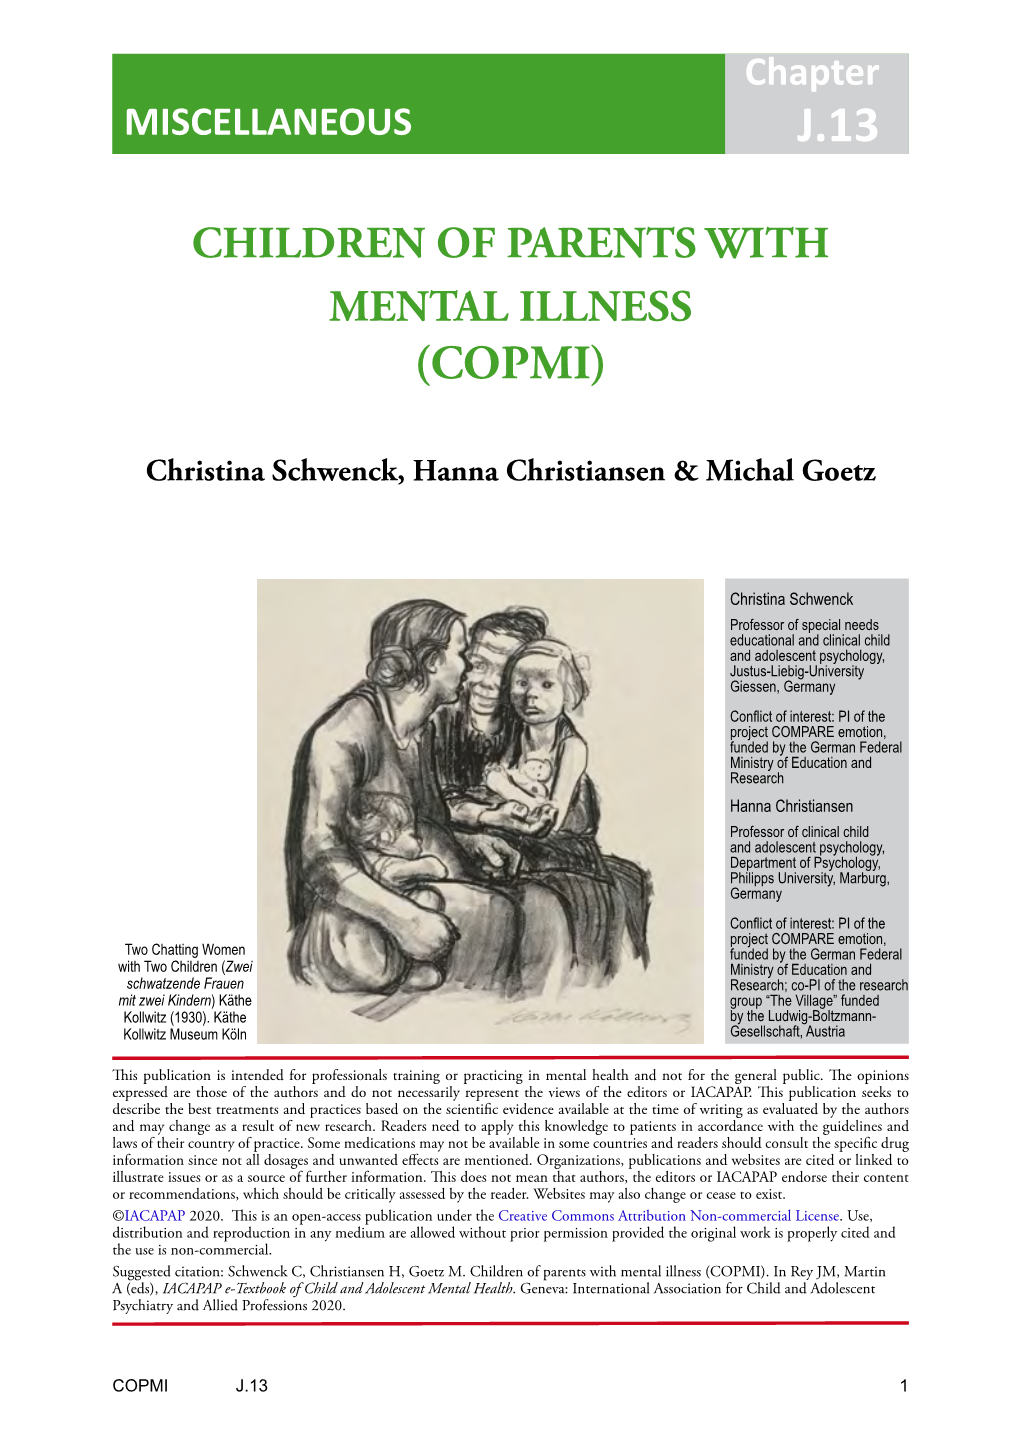 Children of Parents with Mental Illness (Copmi)